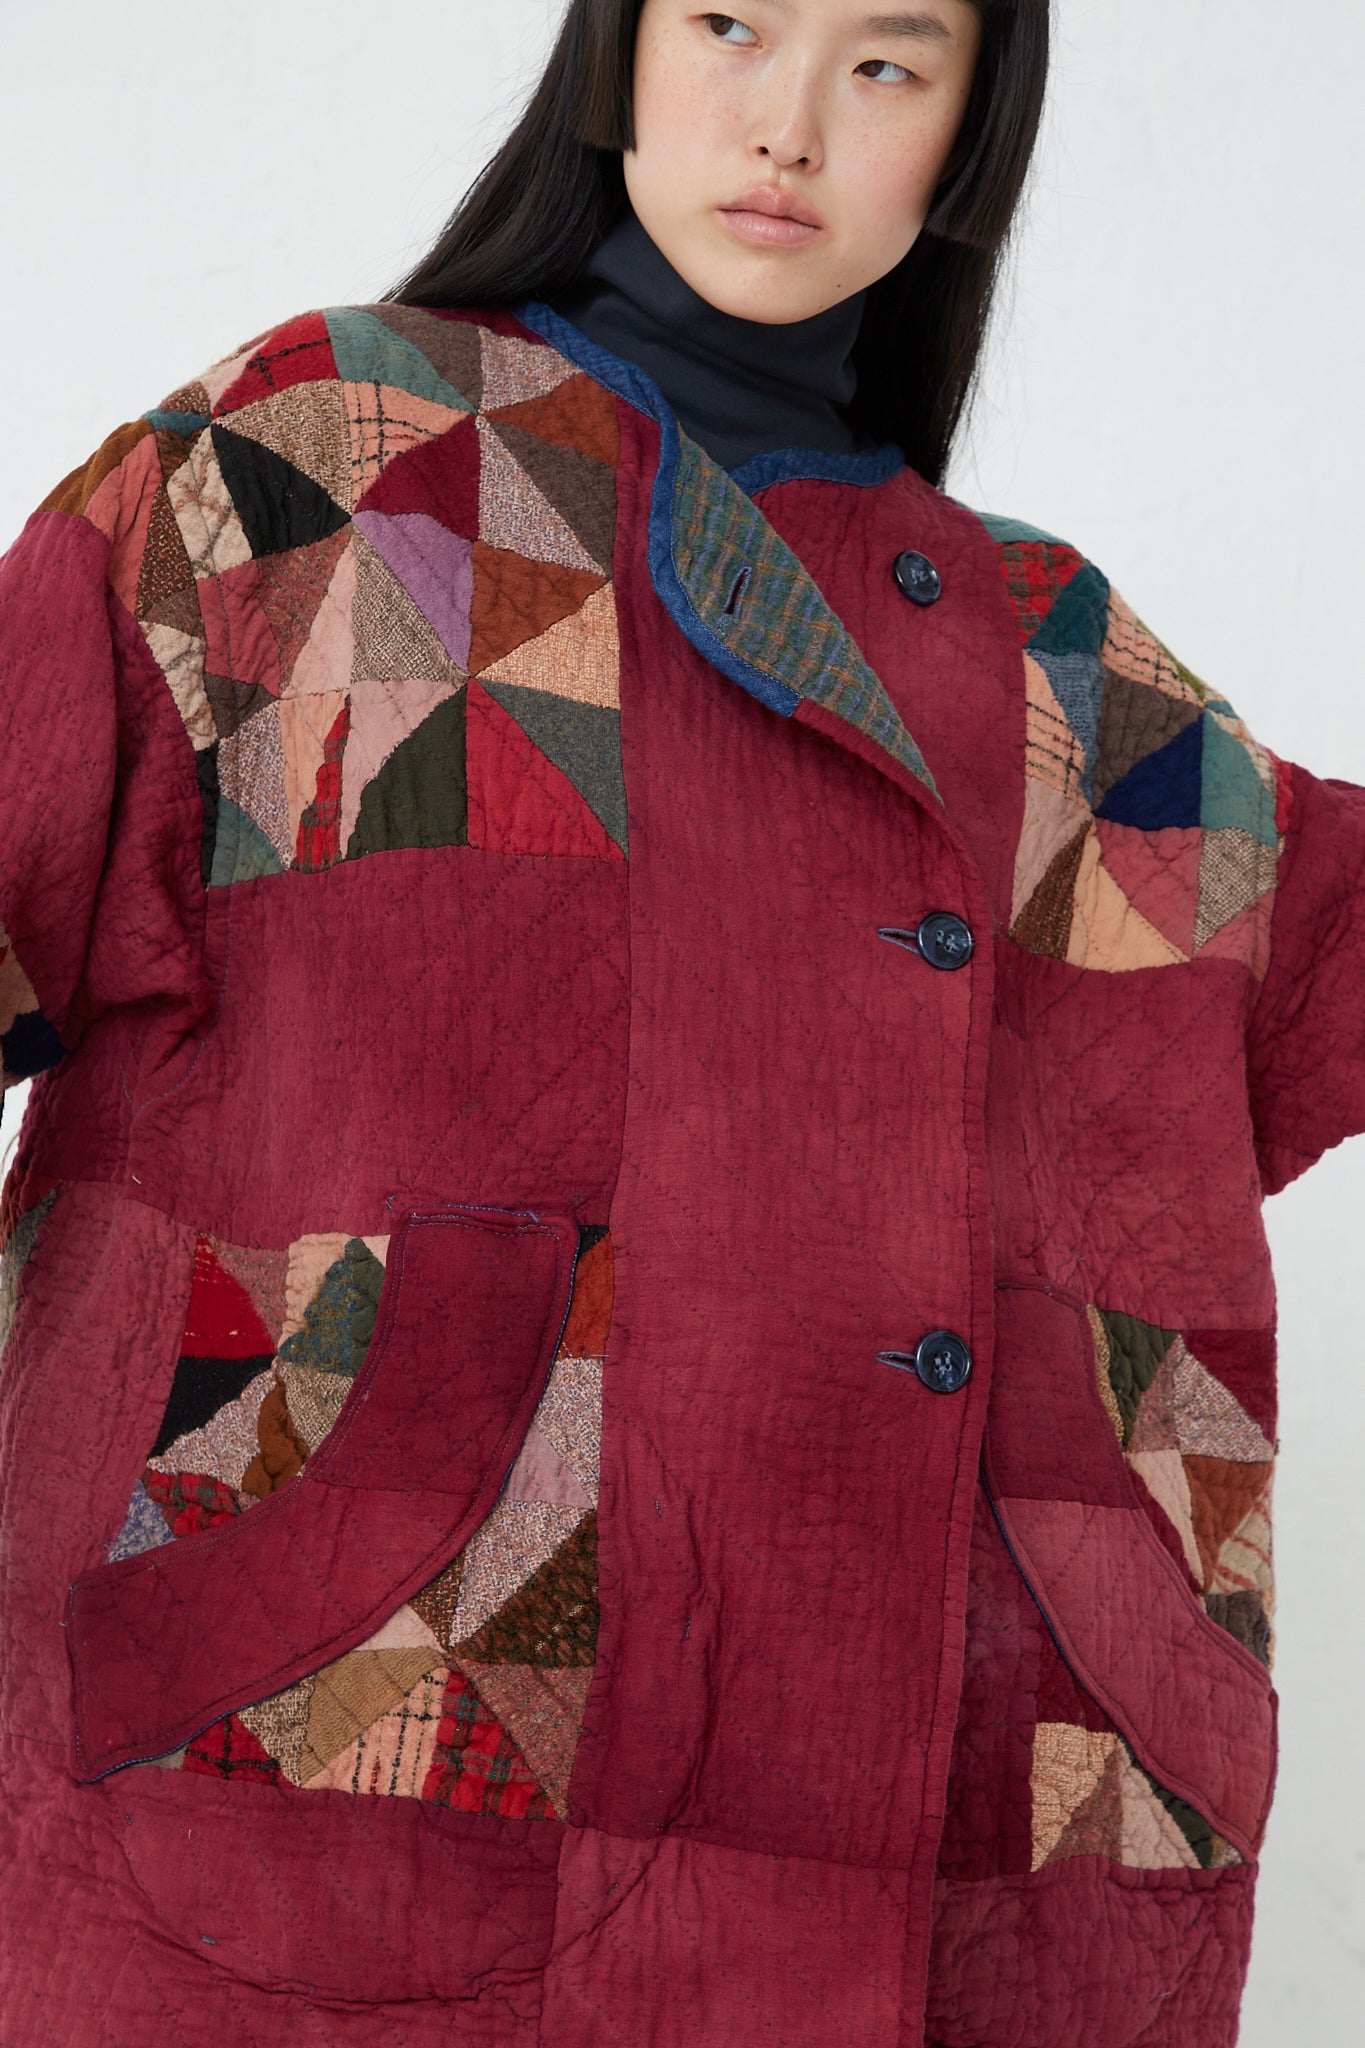 A woman wearing an oversized red As Ever Quilt Jacket in Mulberry.